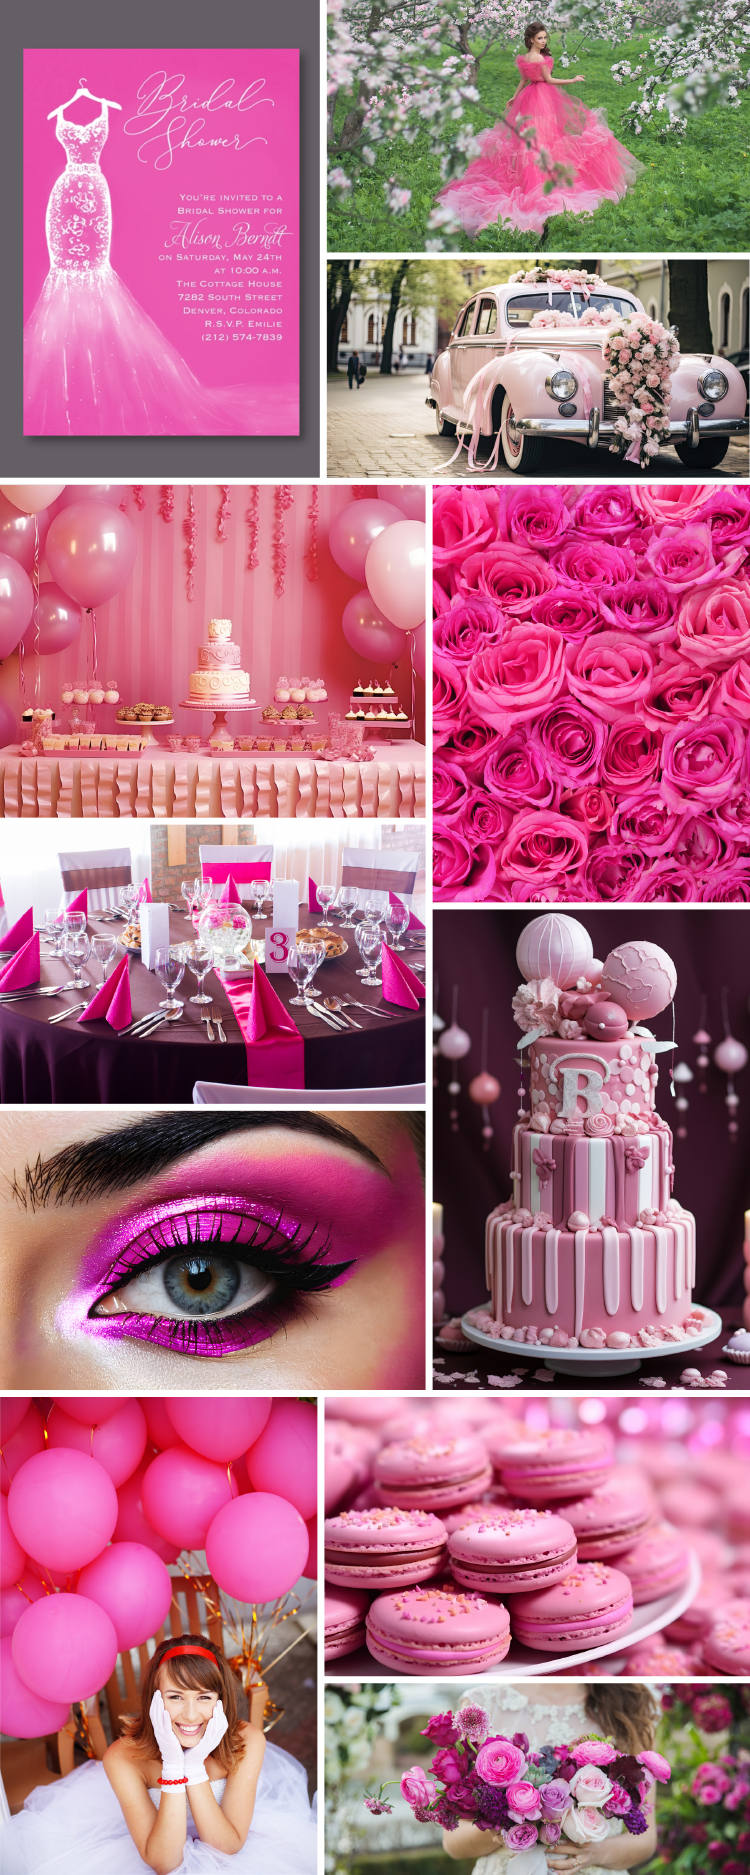 Collage filled with inspiring ideas for pink bridal showers, bachelorette parties and weddings inspired by the Barbiecore trend